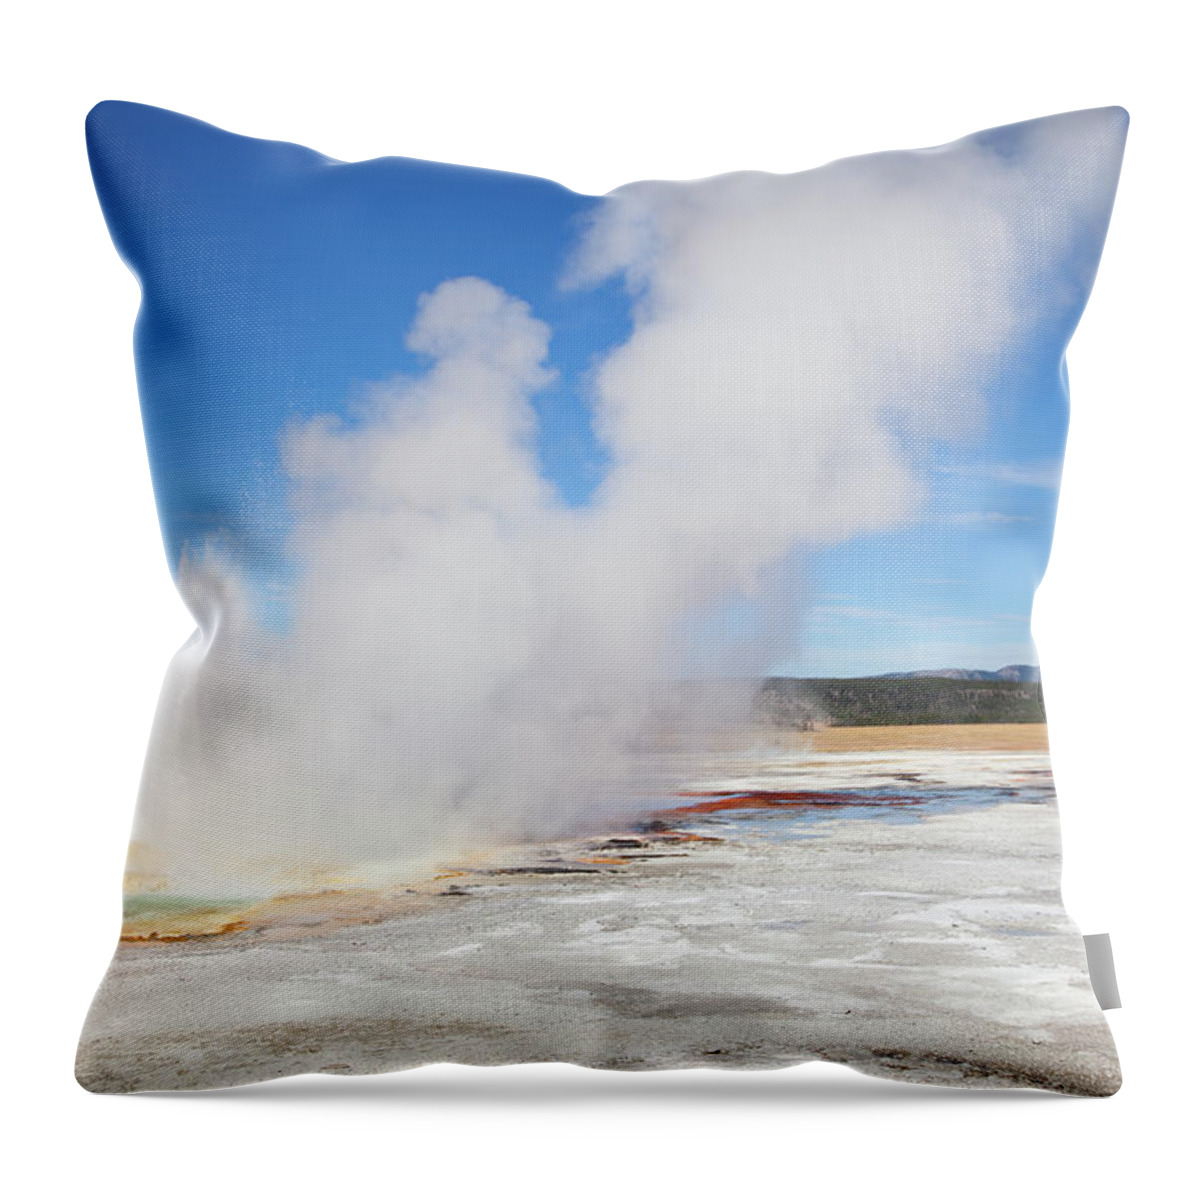 Geyser Throw Pillow featuring the photograph Clepsydra Geyser, Yellowstone National by Terryfic3d